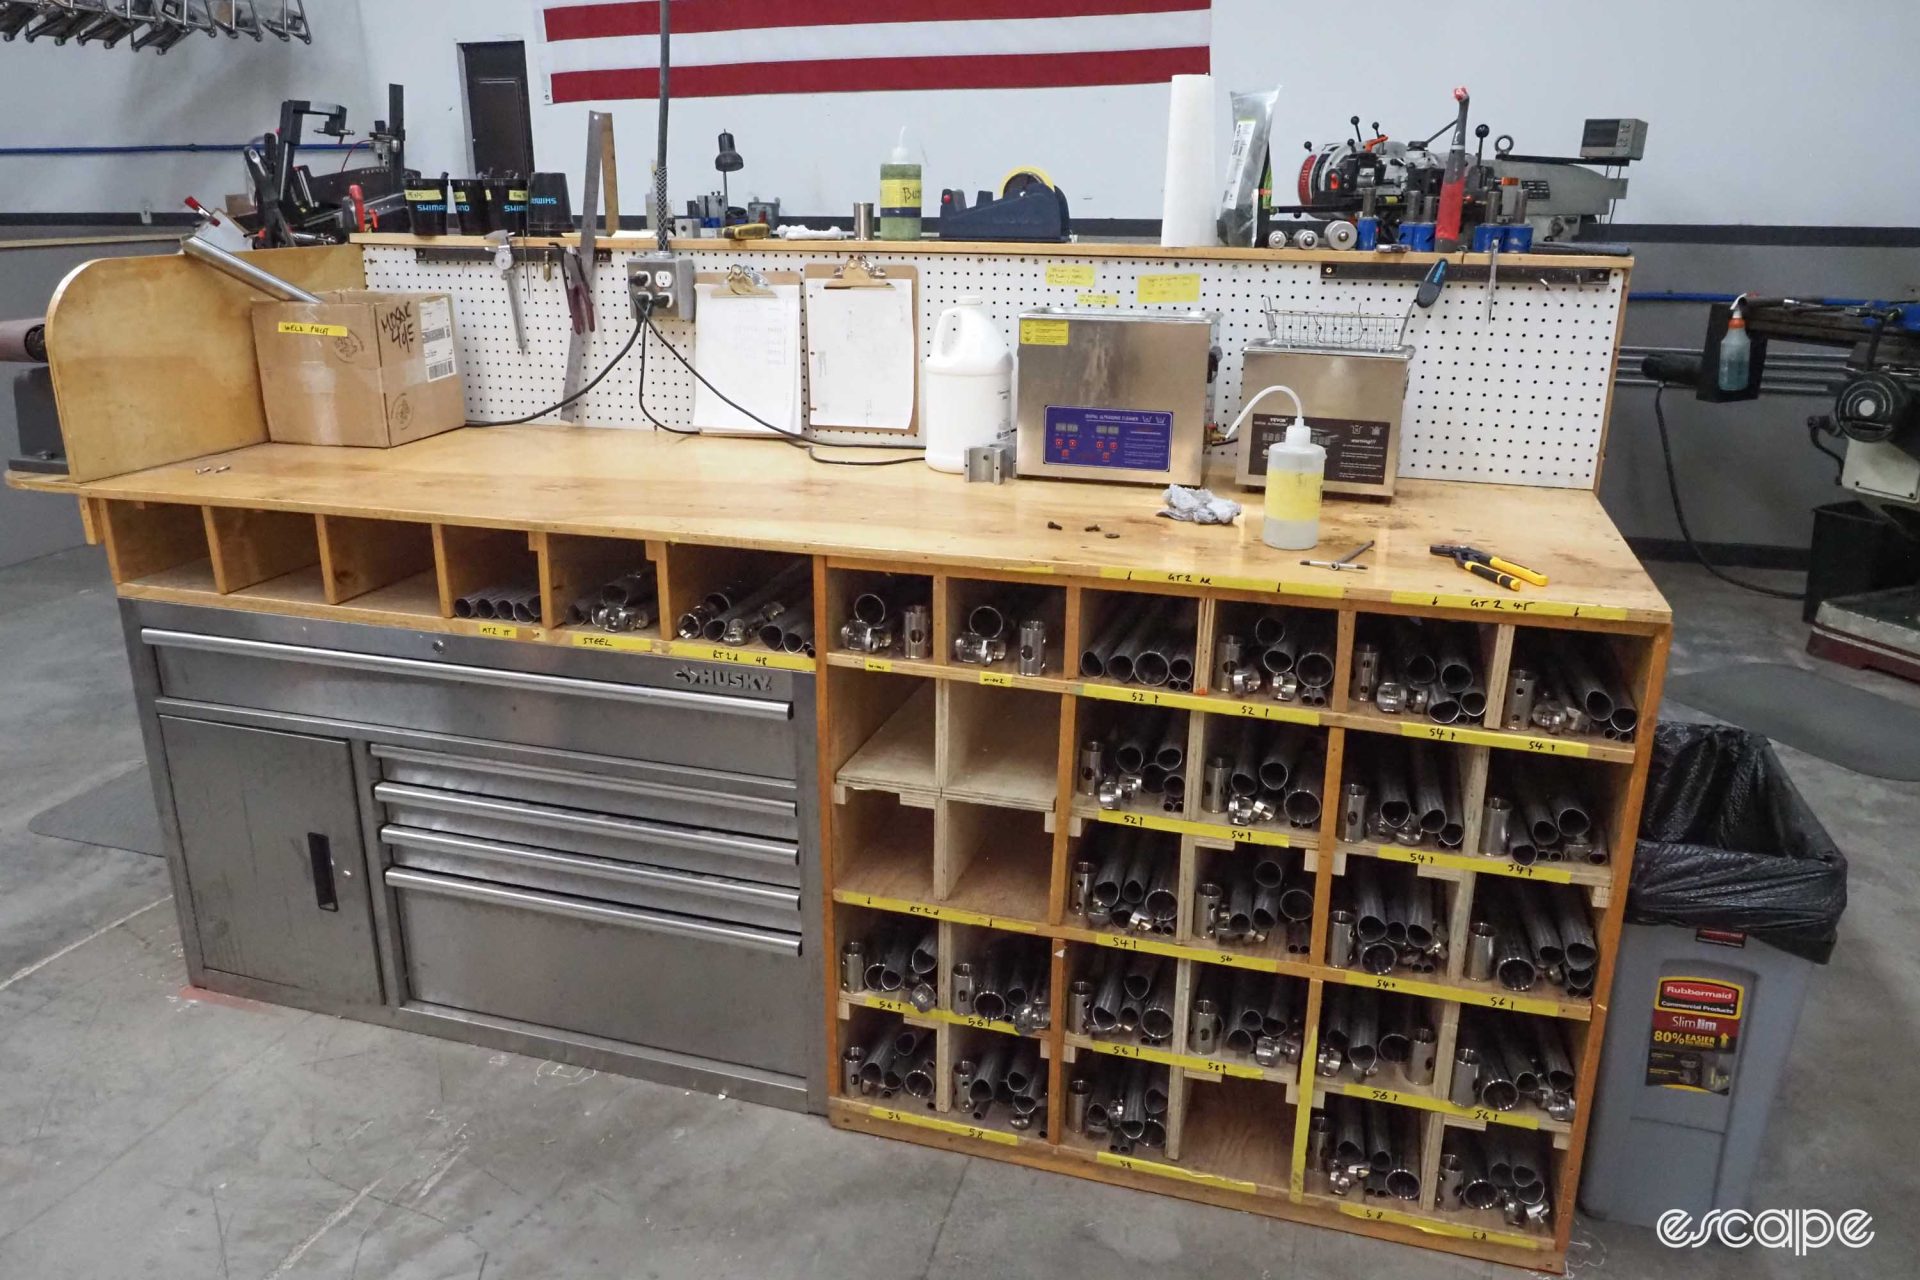 Another neat workbench in the Mosaic factory, with a cubby underneath divided into storage for various builds - each cubby contains an order.